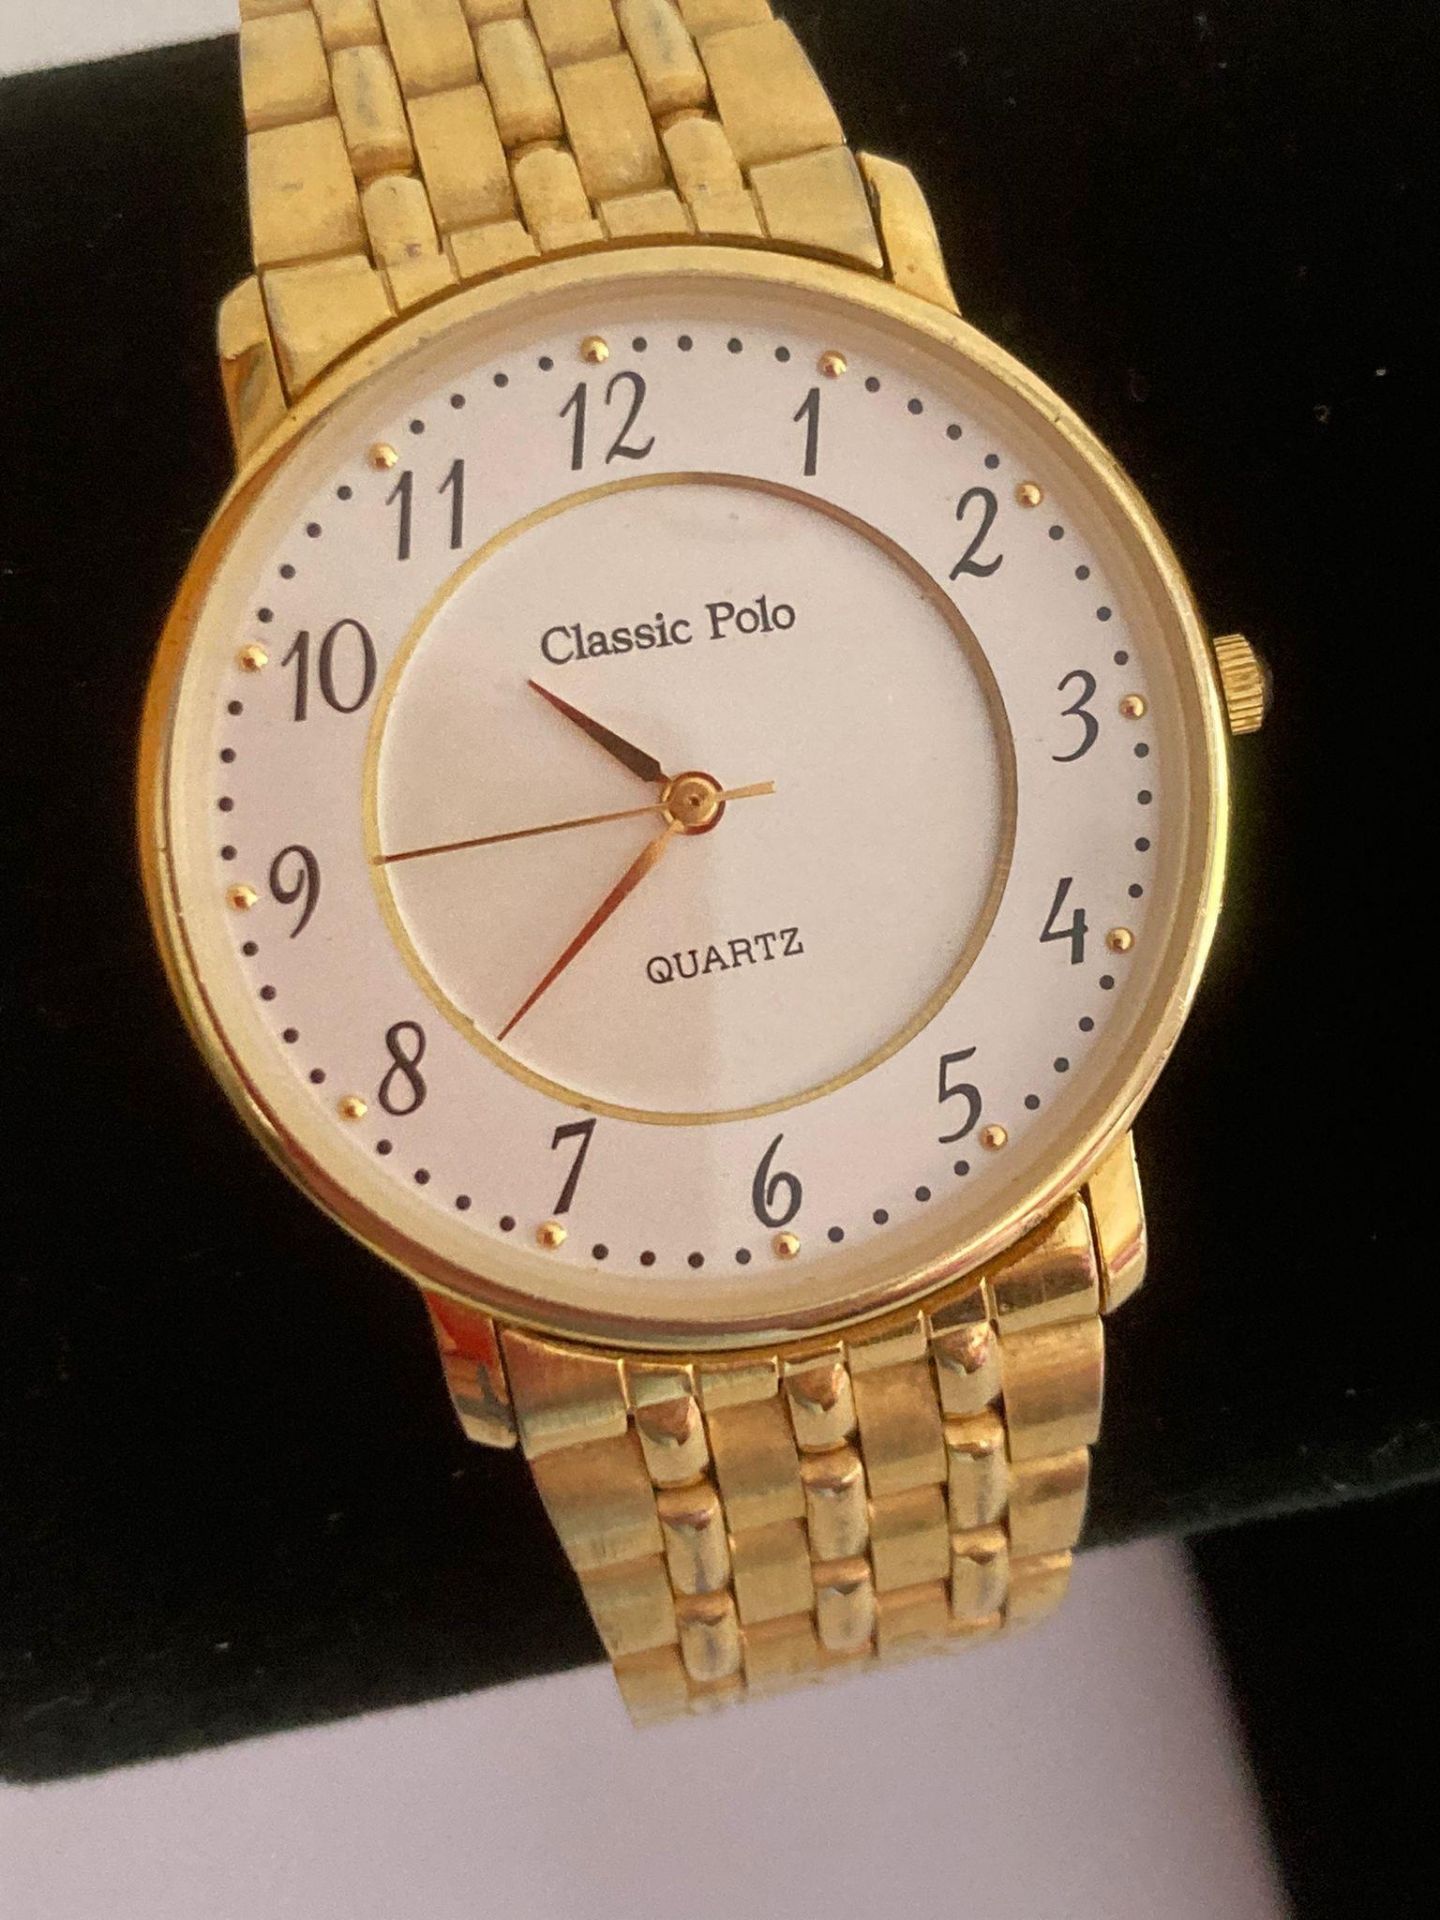 2 x Gentlemans Quality Quartz wristwatches in Gold Tone To include a Classic Polo Golden bracelet - Image 3 of 3